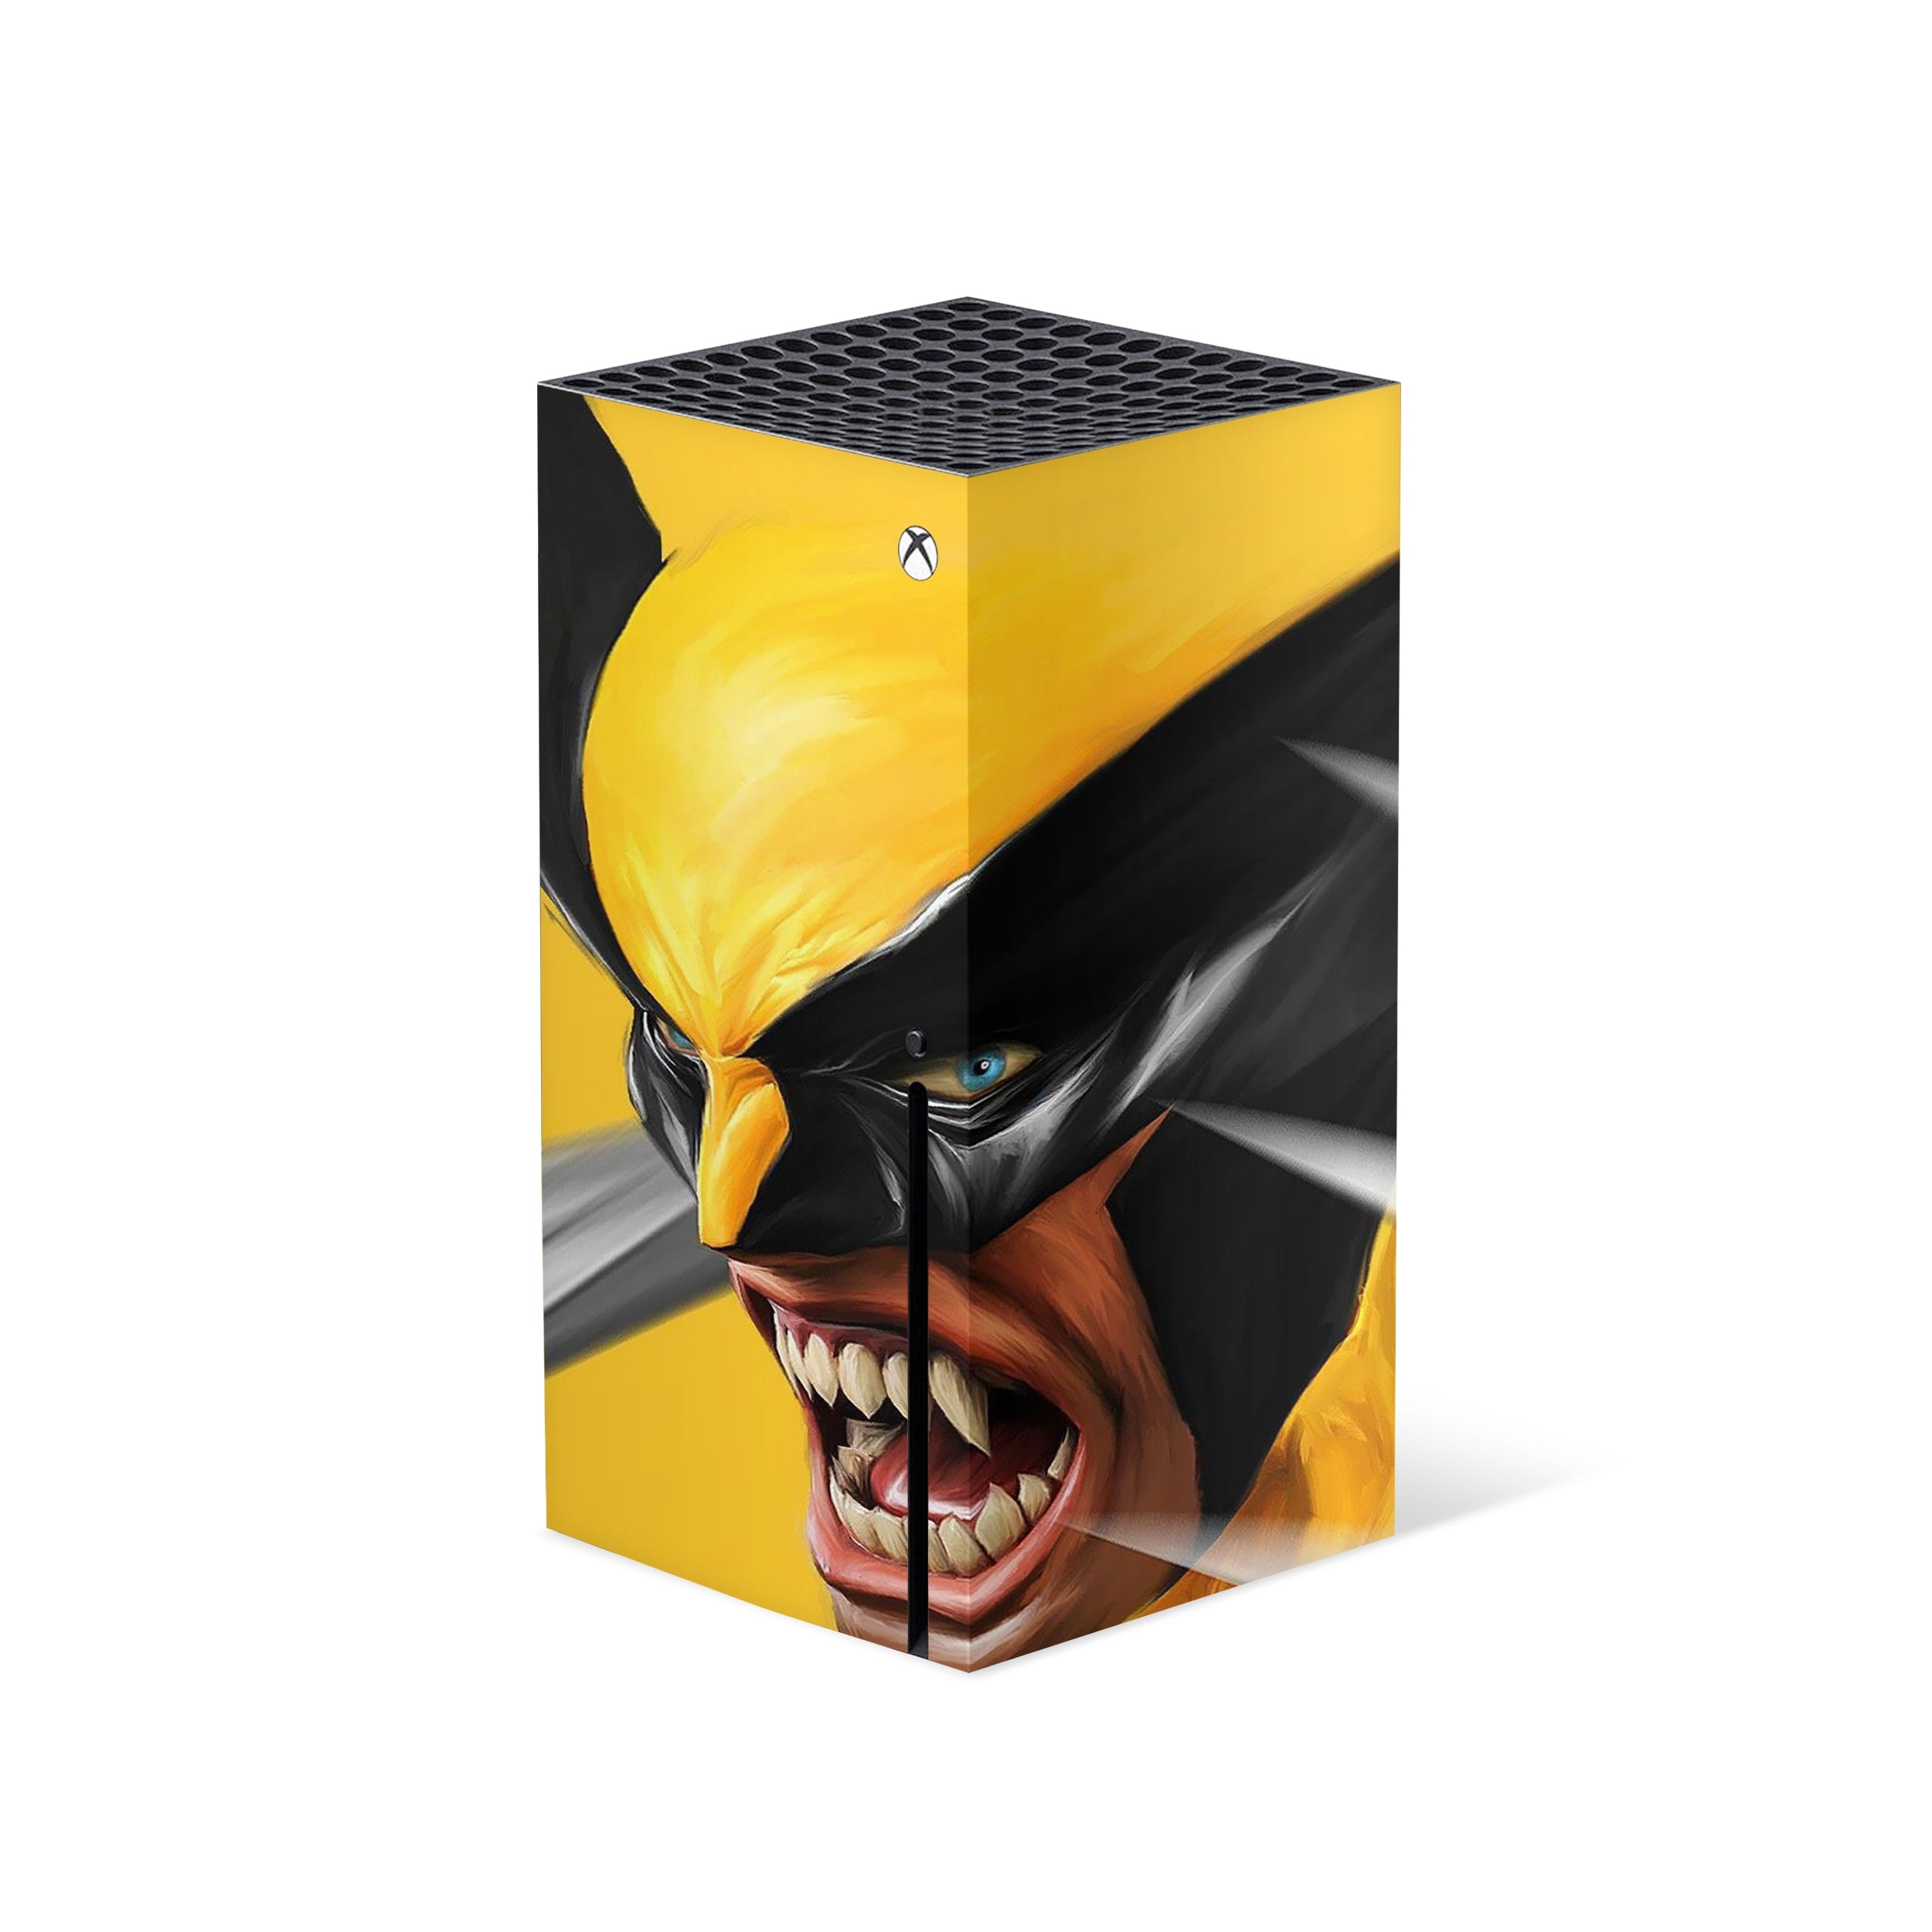 A video game skin featuring a Marvel X Men Wolverine design for the Xbox Series X.